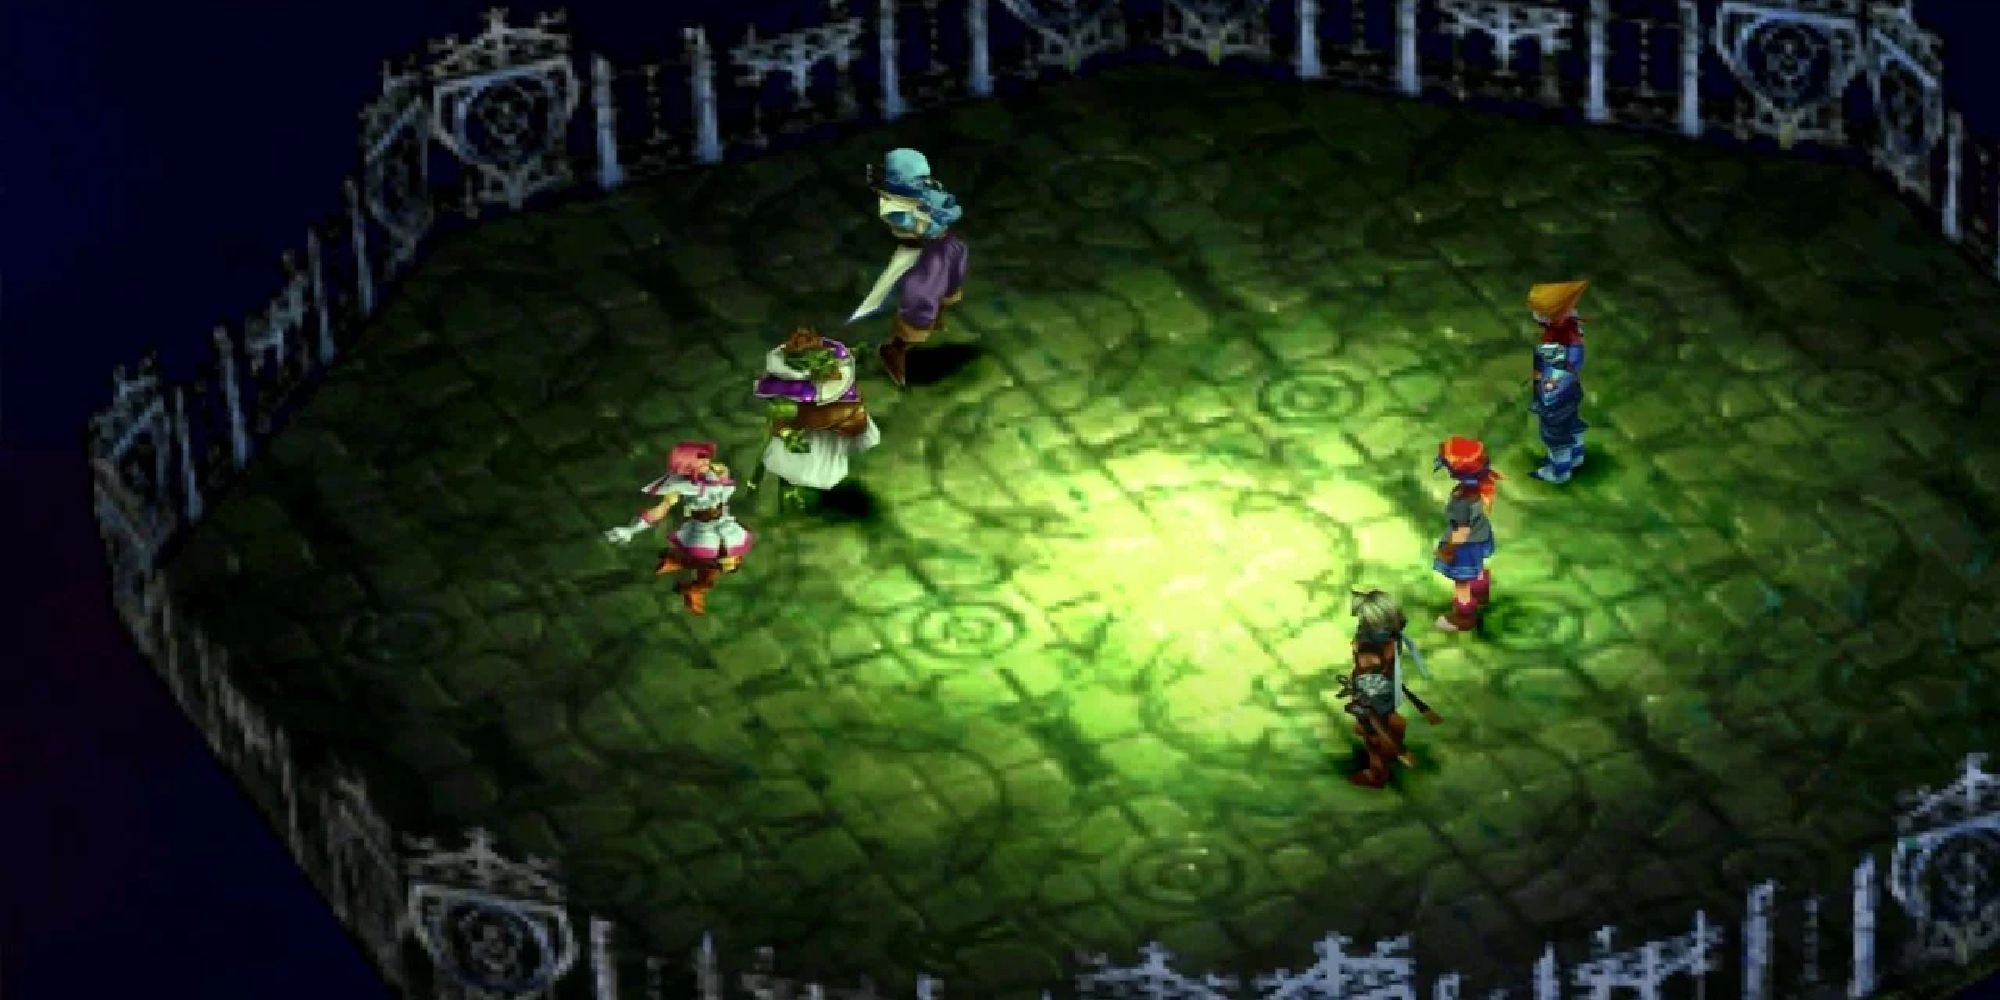 Ozzie, Flea, and Slash face off against the party in the Bend Of Time in Chrono Trigger